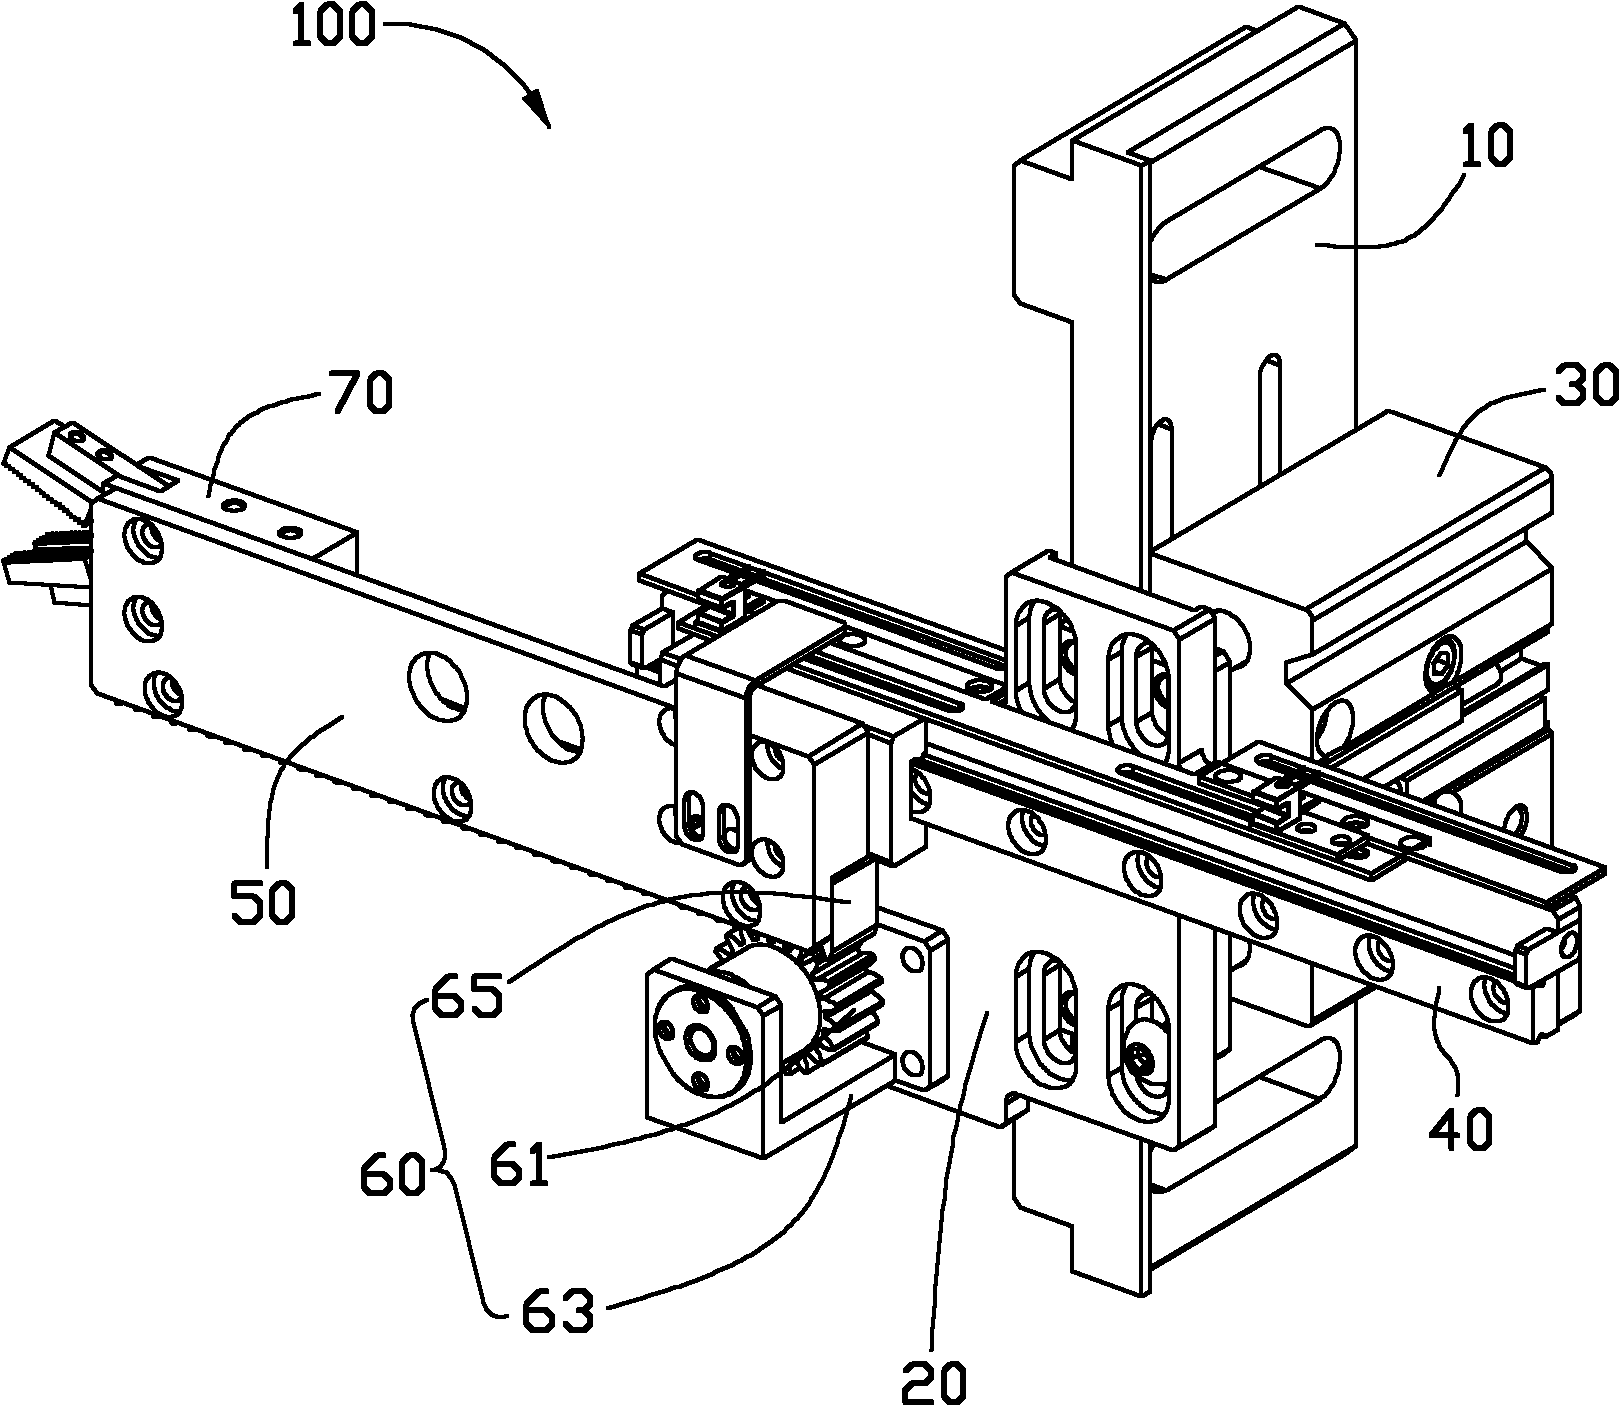 Clamping device for manipulator